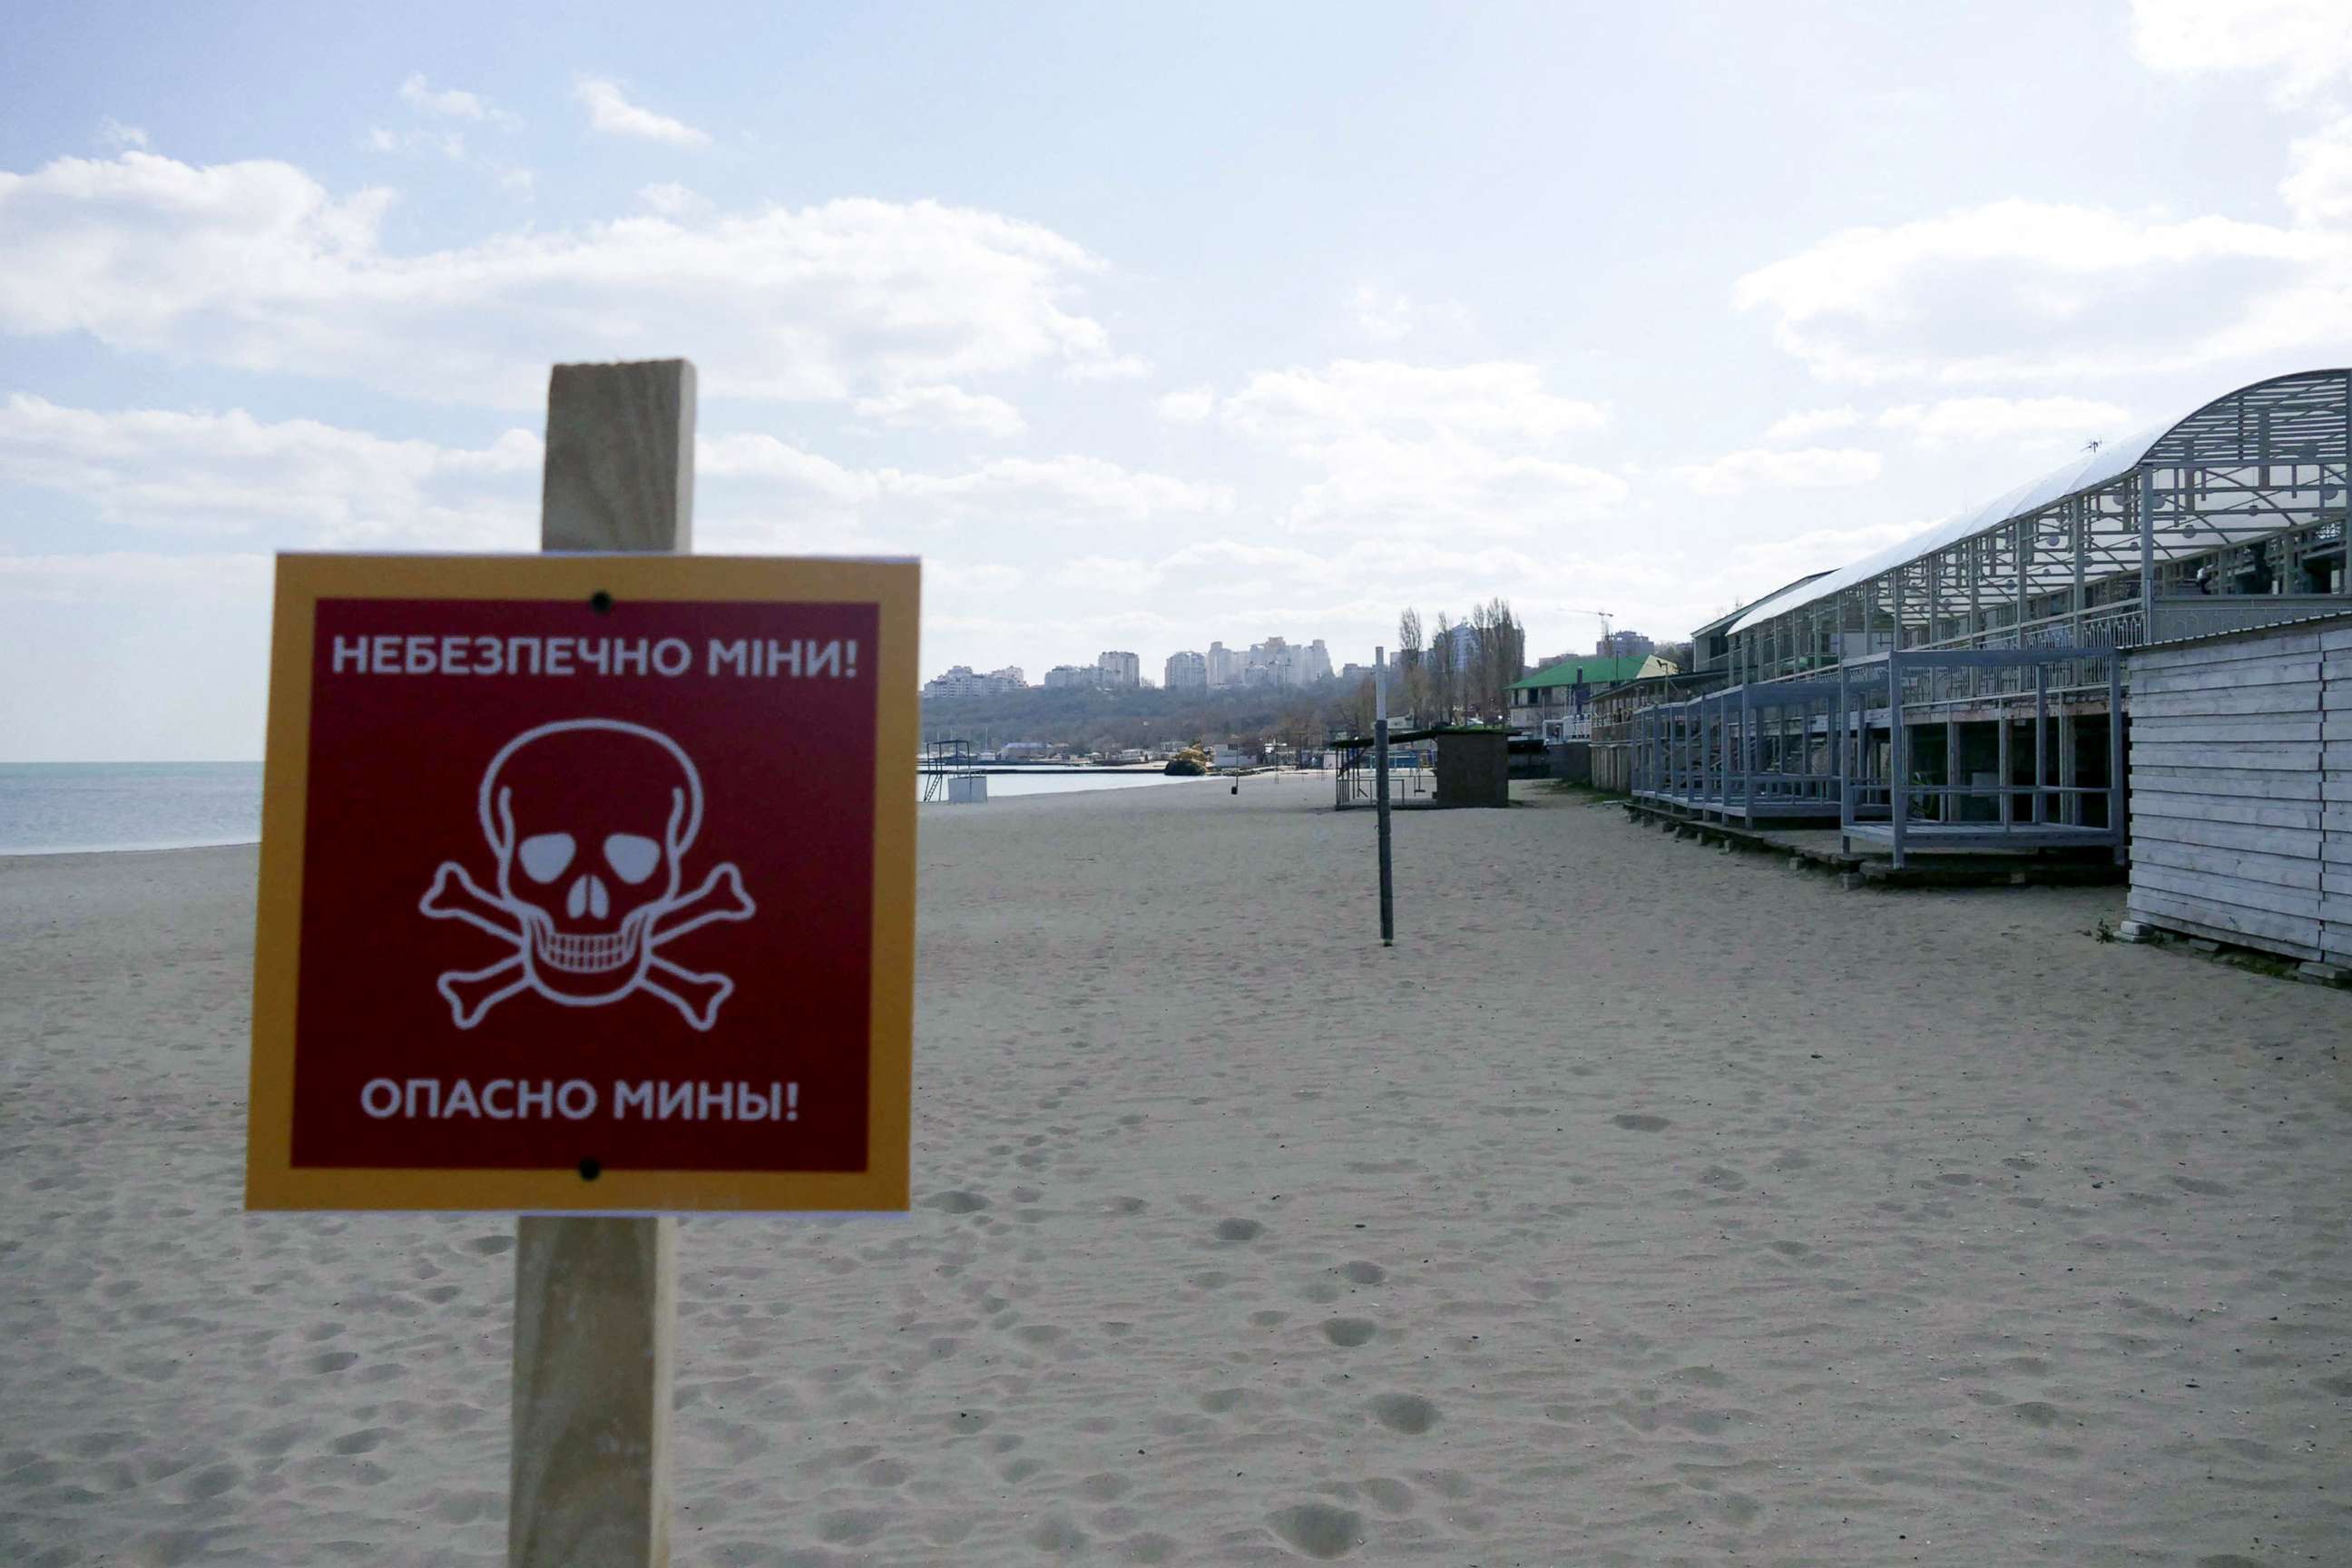 PHOTO: A sign warns beach-goers of potential land mines, in Odessa, Ukraine, April 4, 2022.